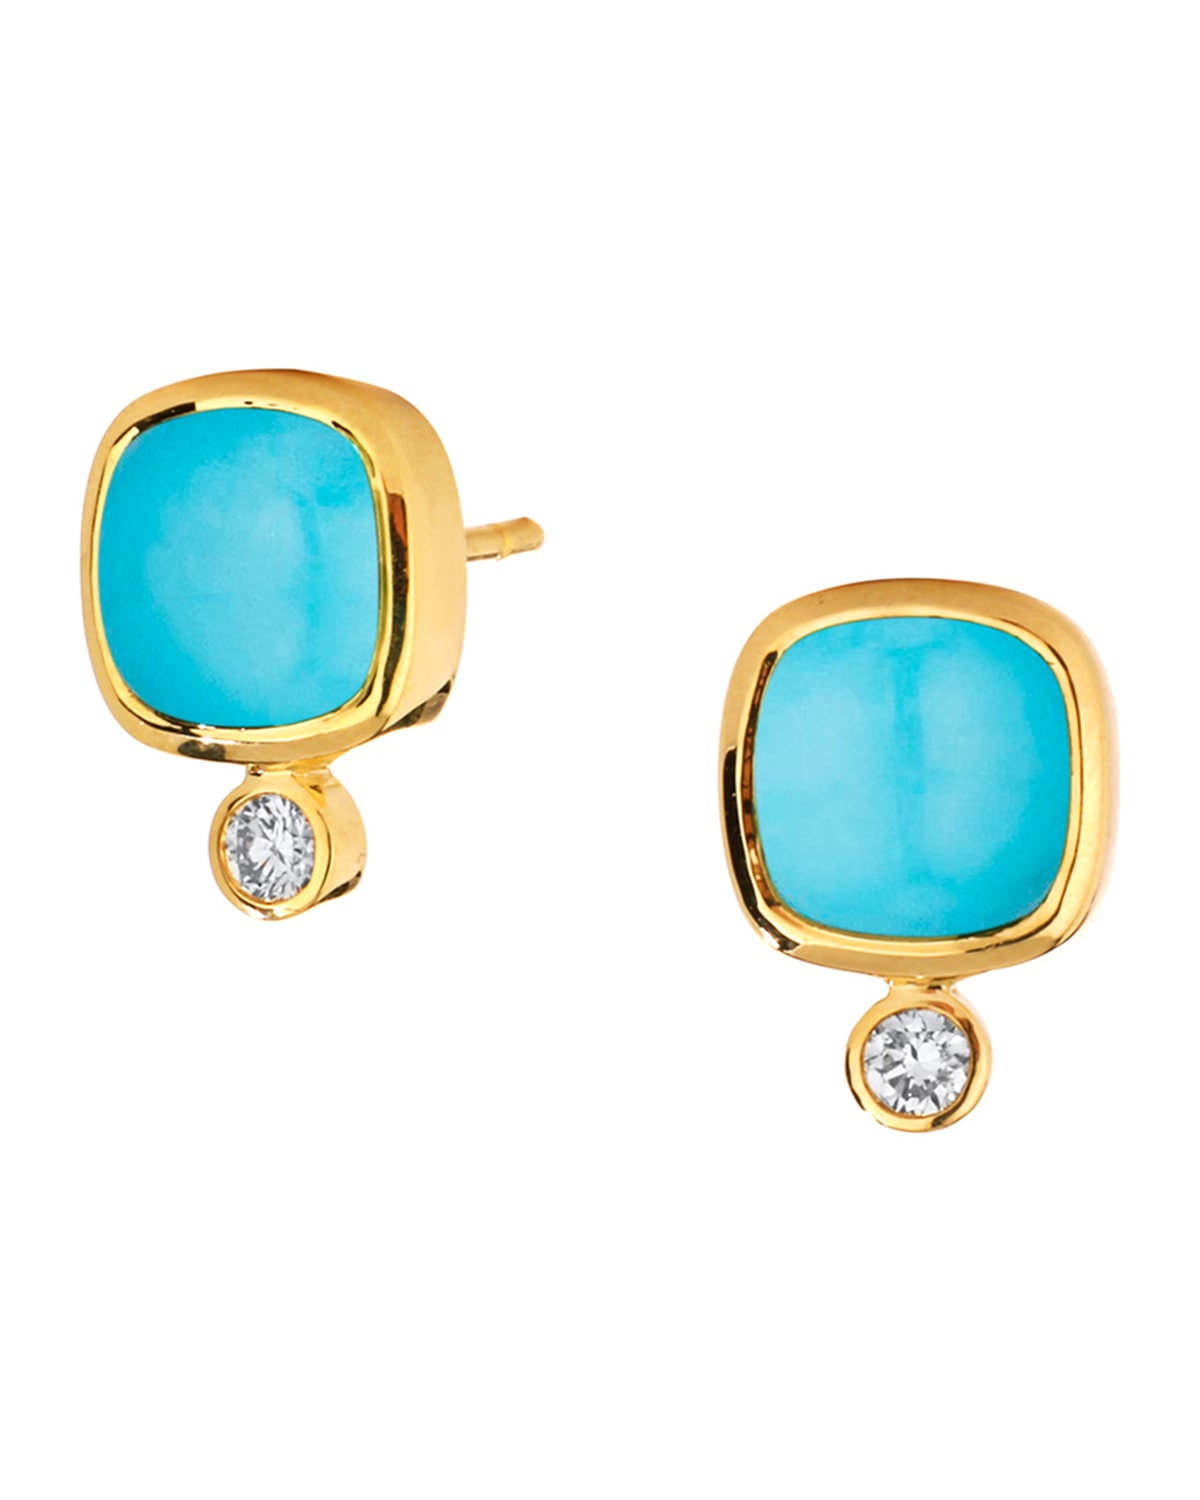 Syna Limited Edition 18k Turquoise Stud Earrings With Diamonds